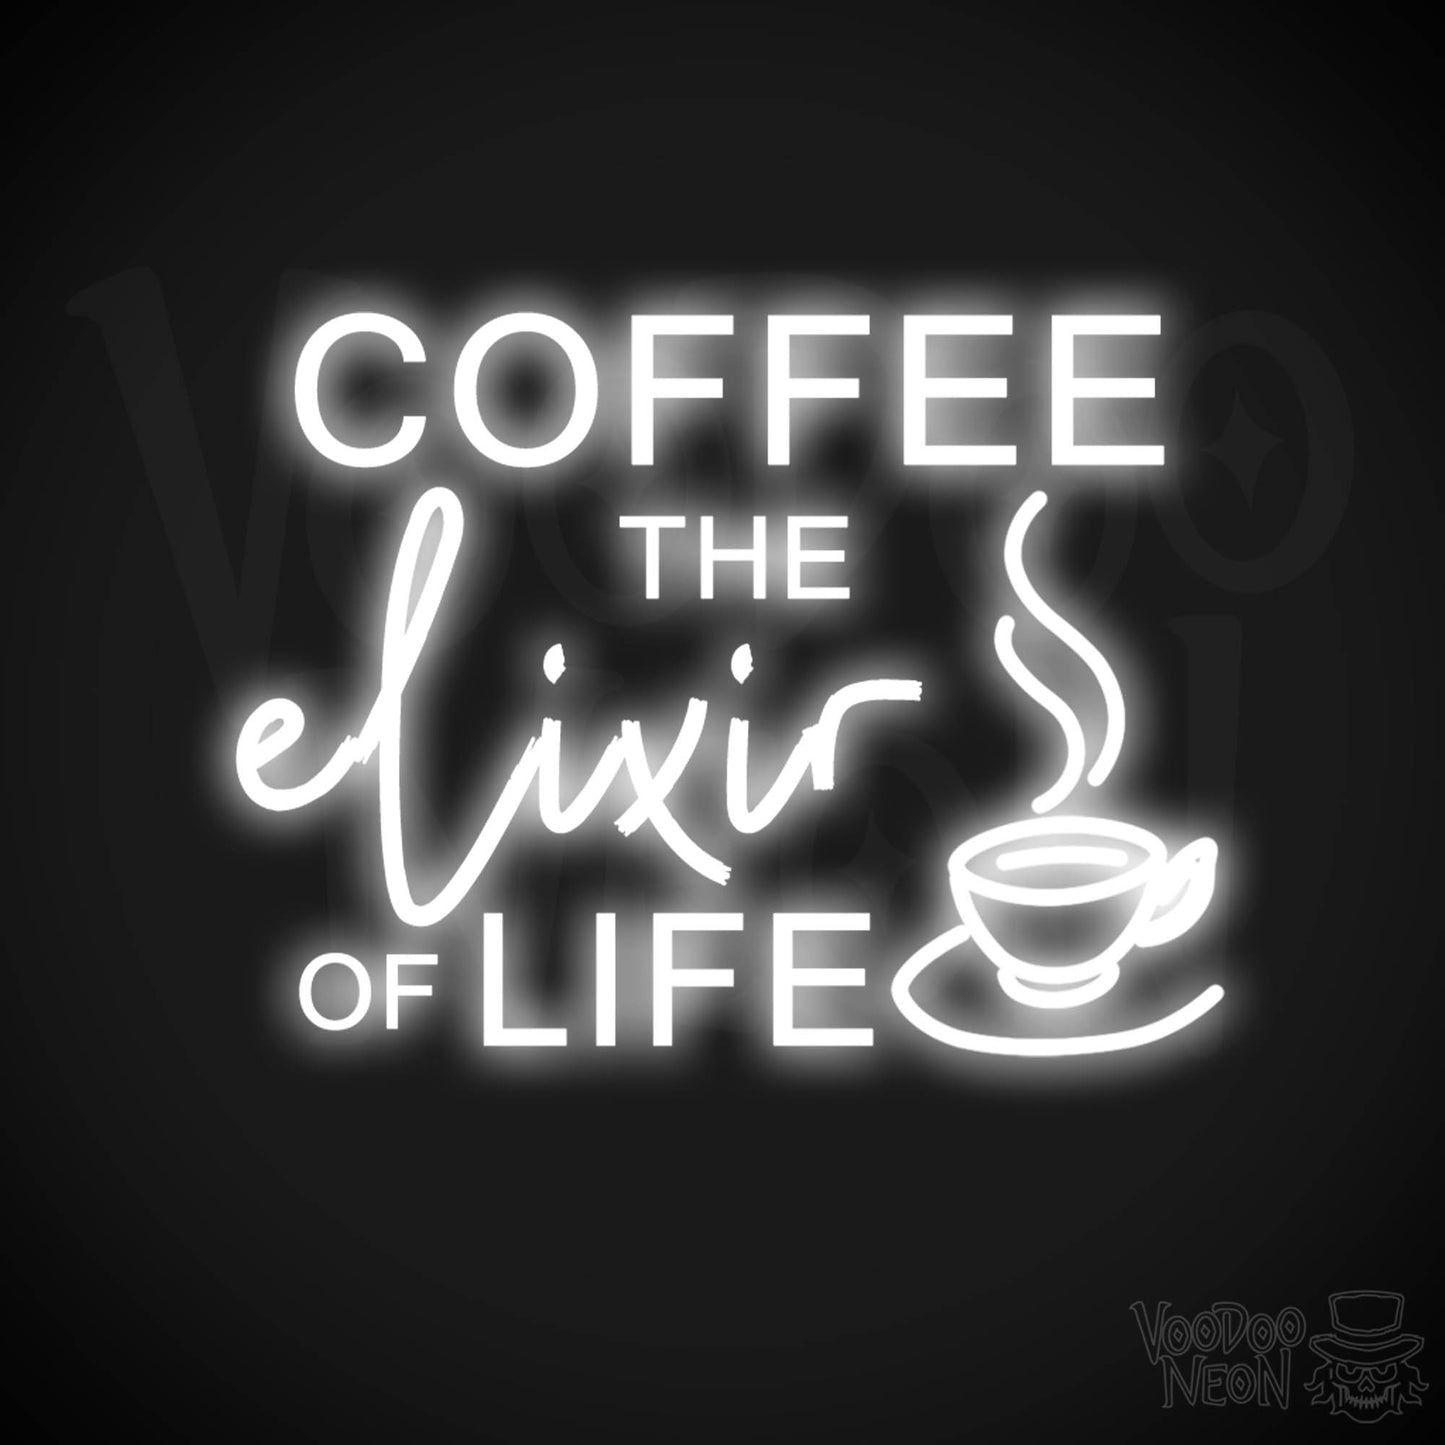 Coffee - The Elixir Of Life Neon Sign - The Elixir Of Life Sign - Color White